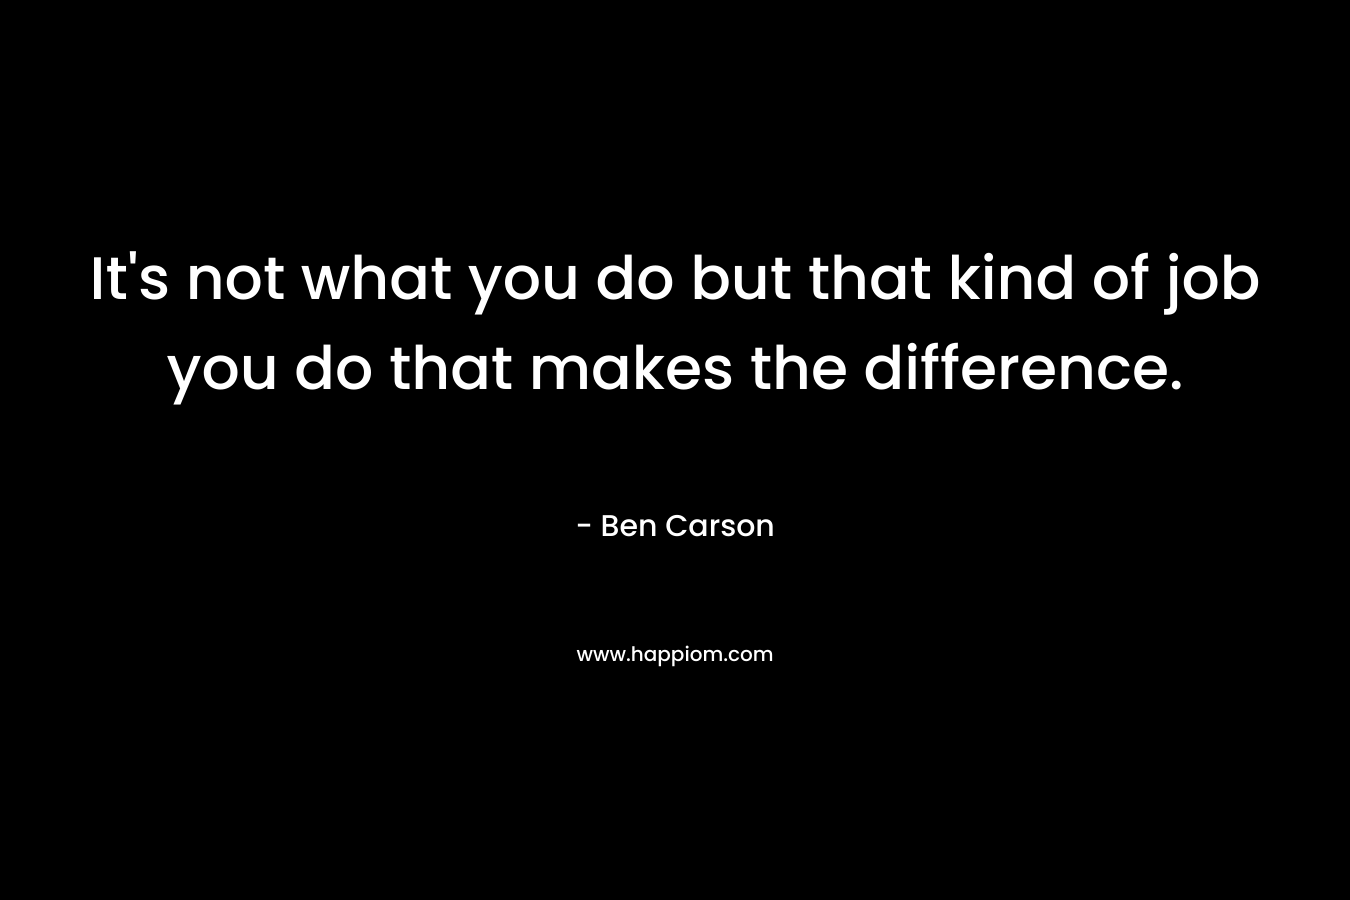 It’s not what you do but that kind of job you do that makes the difference. – Ben Carson